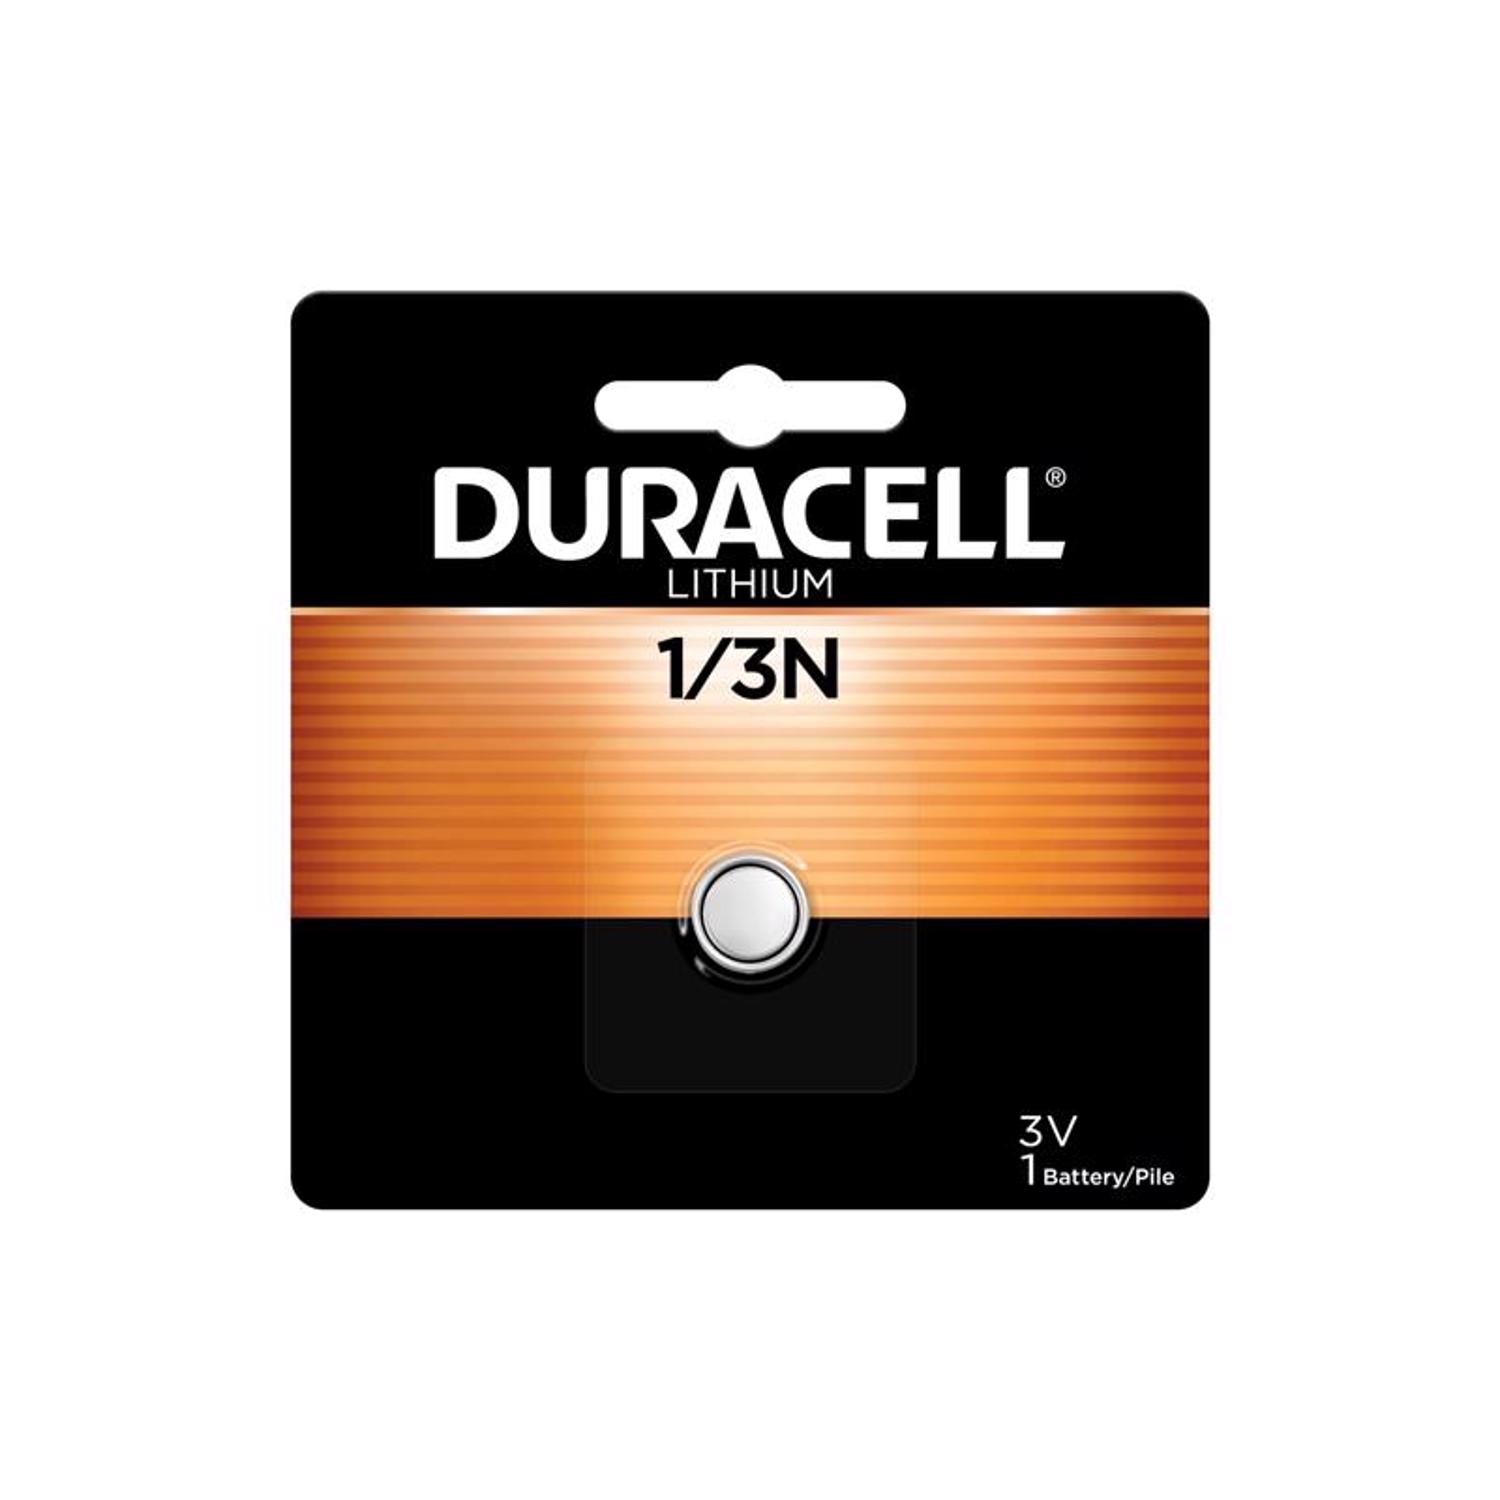 Duracell Lithium Button Battery 3V 2032 DL / CR2032 2 Units